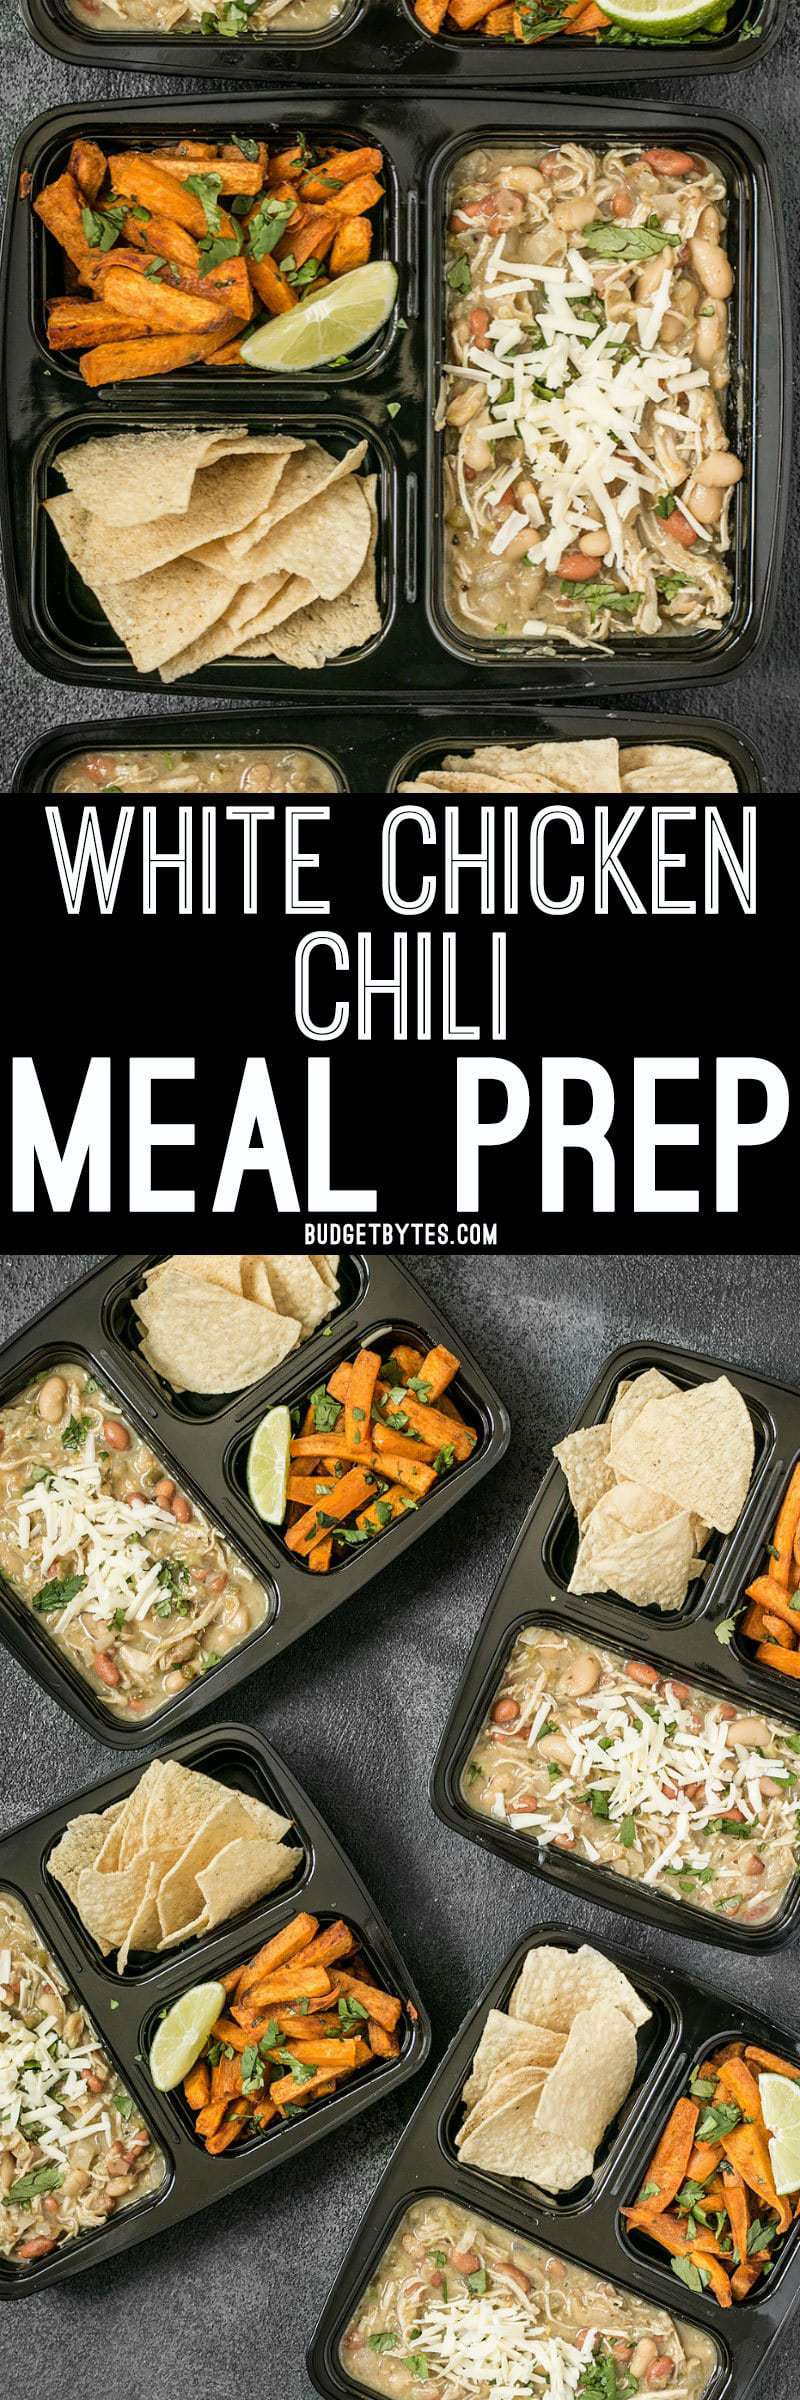 https://www.budgetbytes.com/wp-content/uploads/2017/08/White-Chicken-Chili-Meal-Prep-Collage.jpg